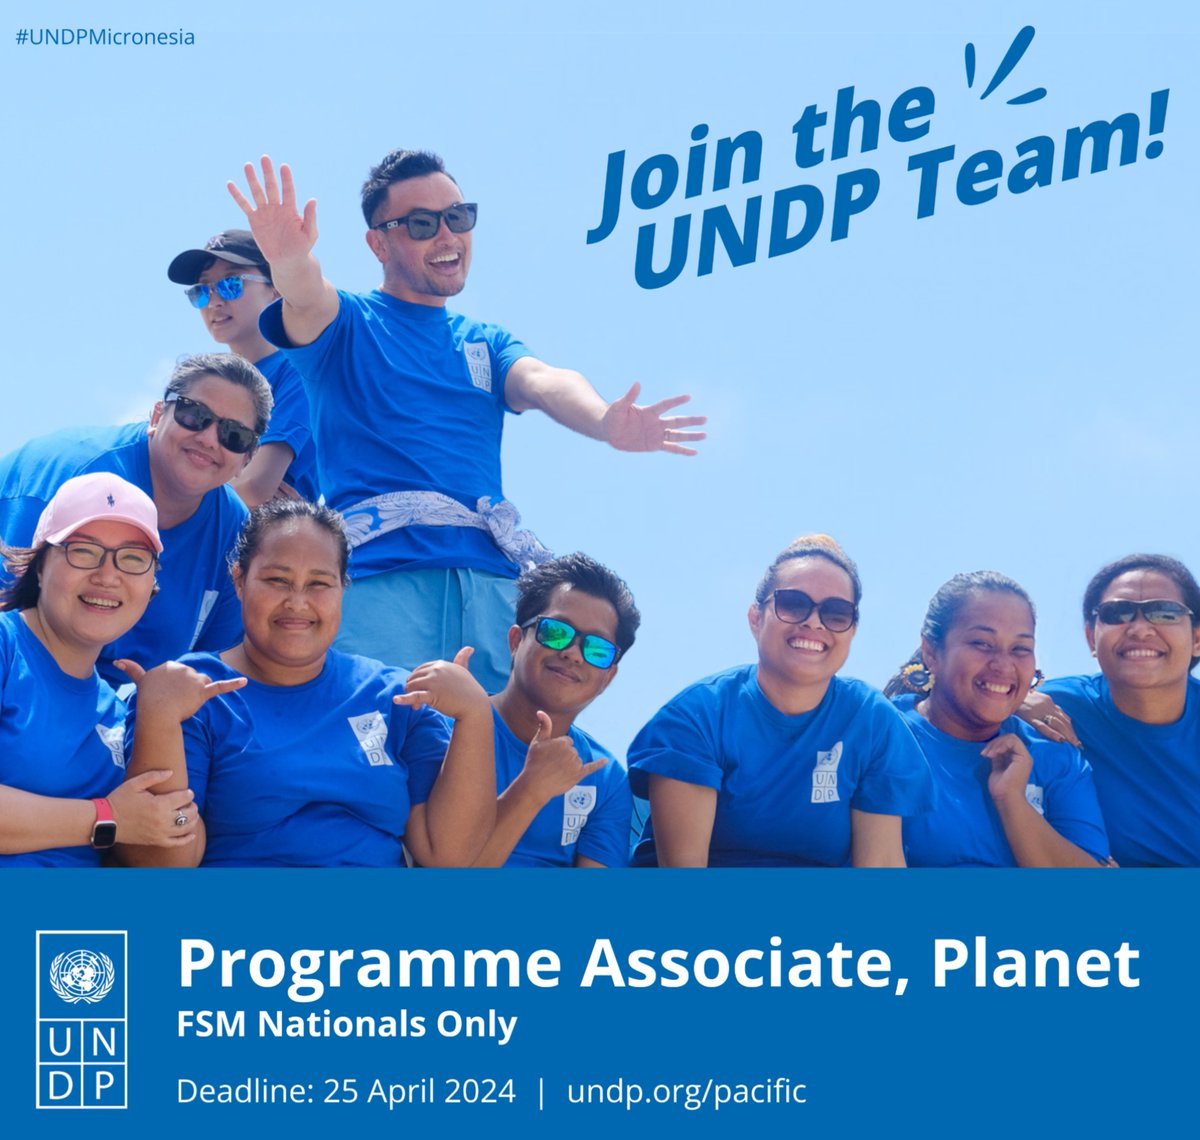 📣Calling all interested #FSM Nationals! Join the dynamic UNDP Team in Pohnpei 🇫🇲 as Programme Associate & work closely with operations, programme, & project teams under the Resilience & Climate Change portfolio. Apply by 25 April ➡️ zurl.co/7XRn #UNDPMicronesia